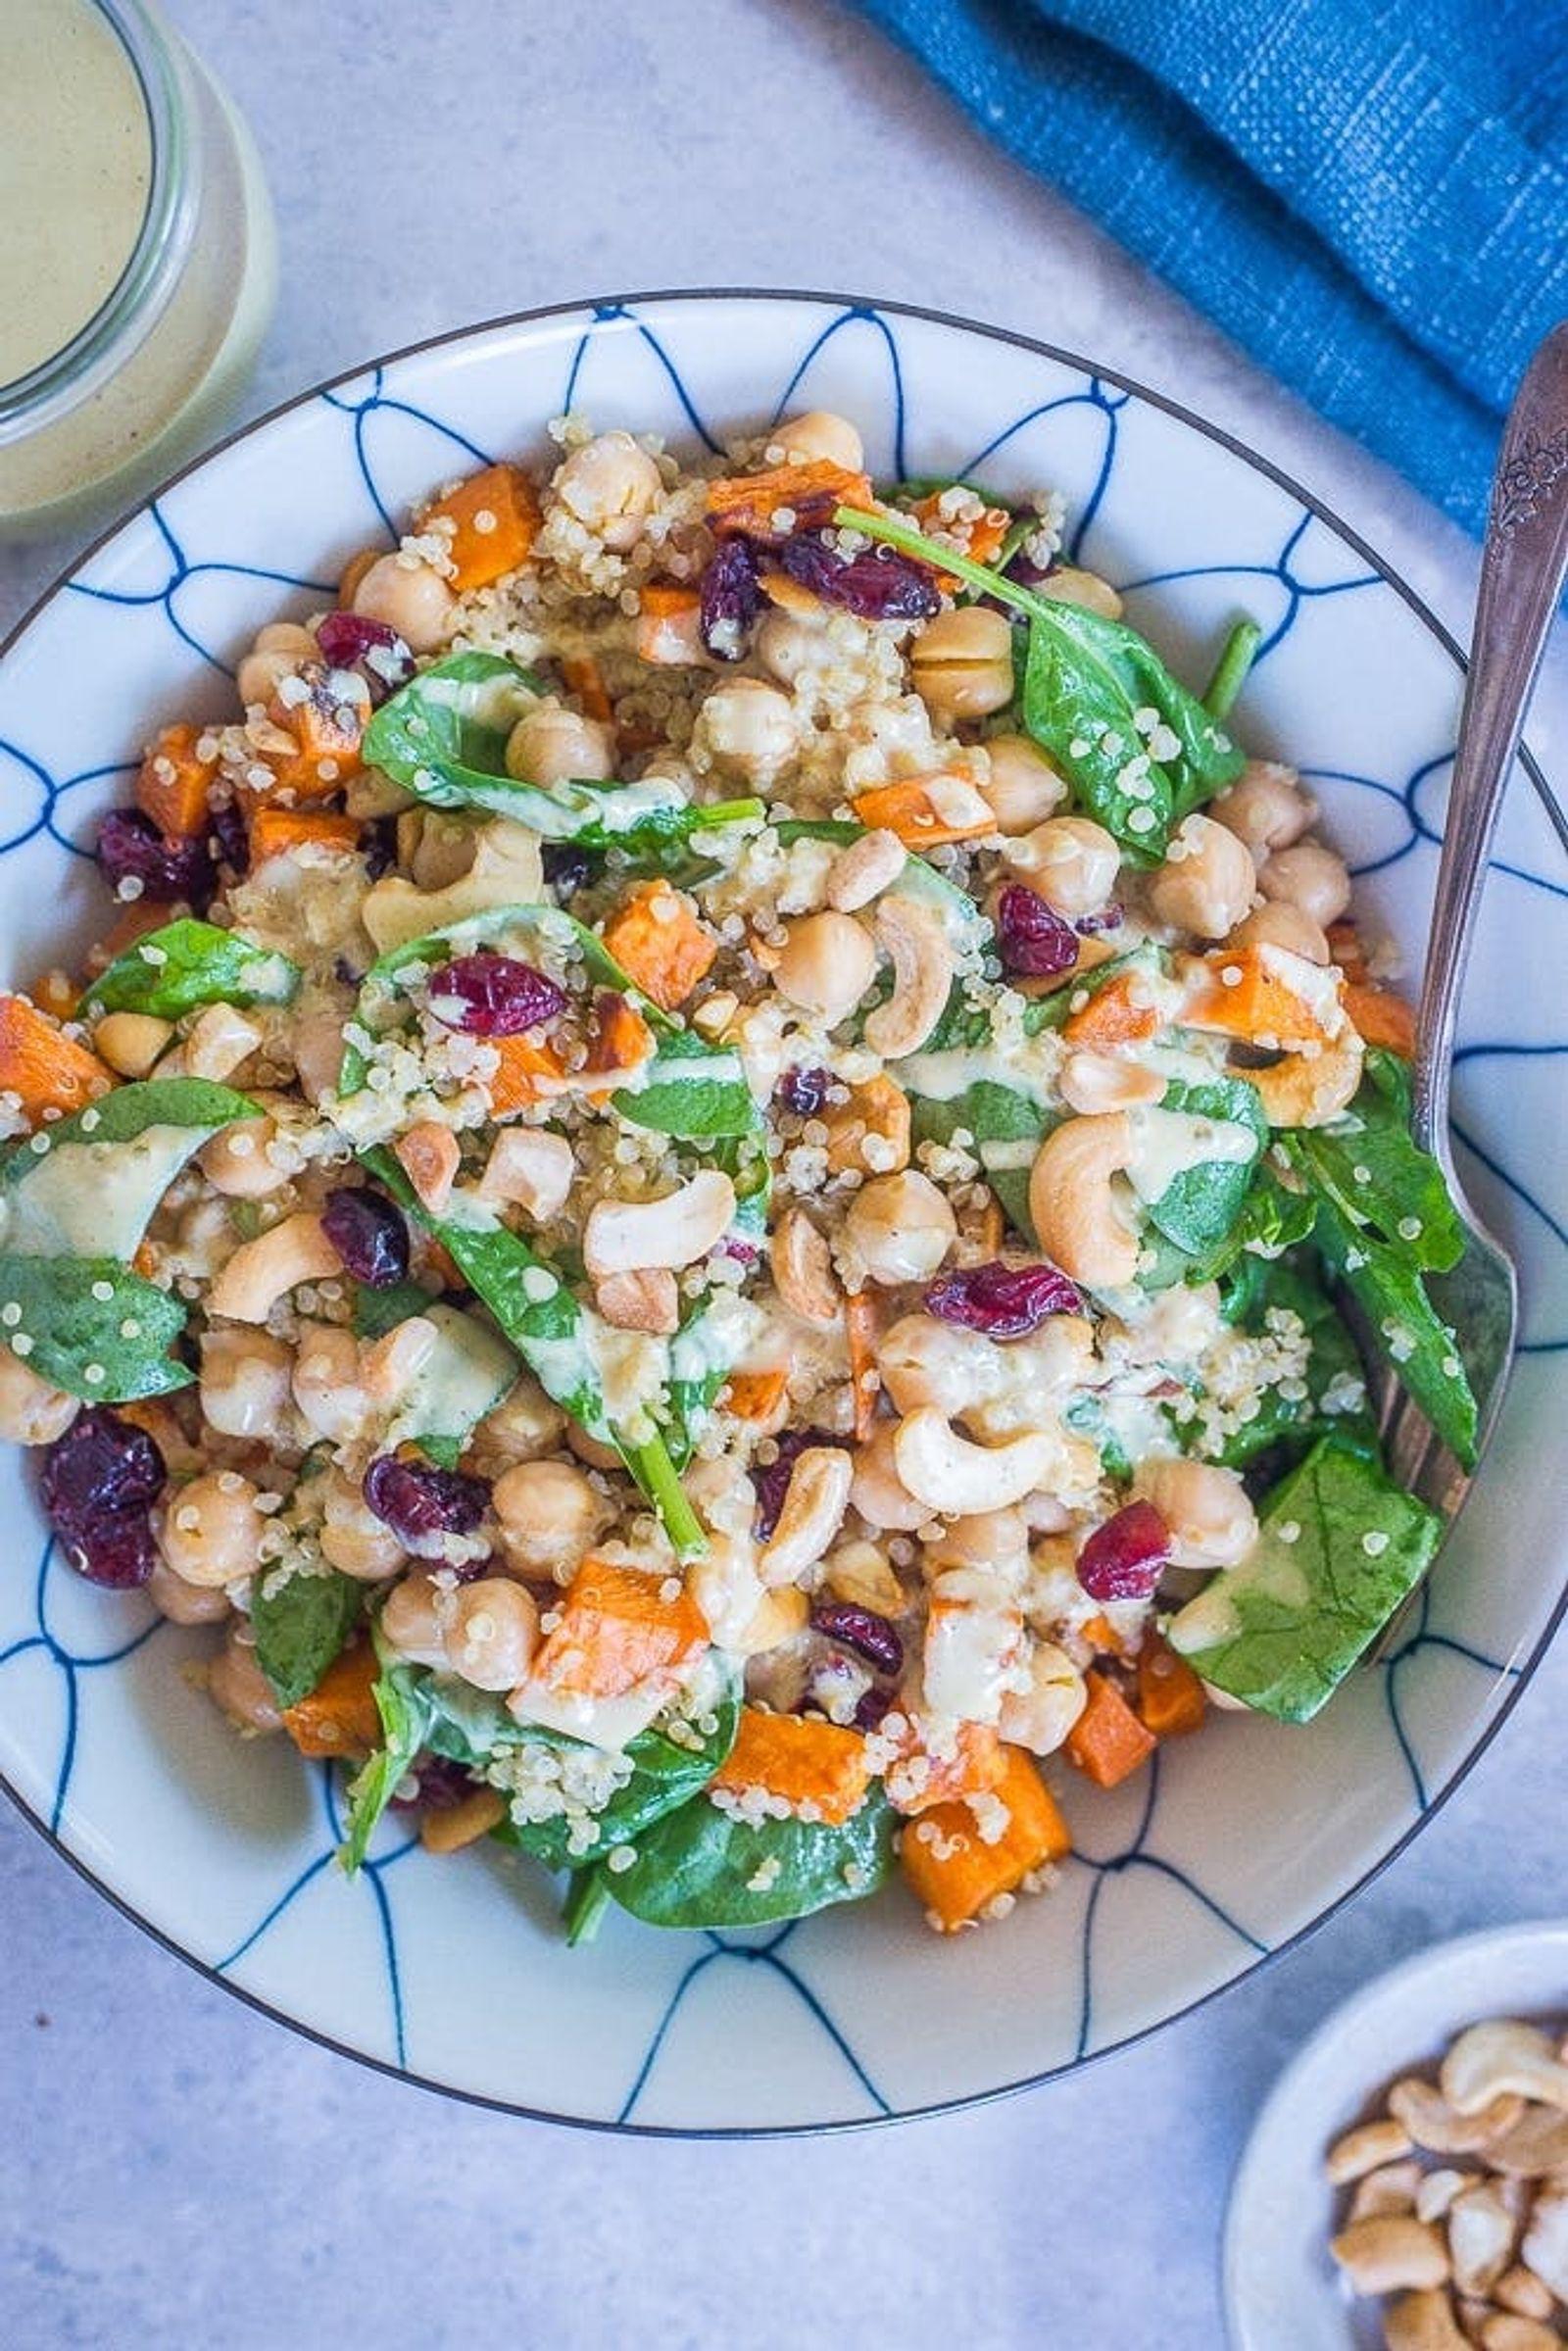 This is one amazing salad in terms of taste, nutritional value, <em>and </em>meal prep-ability. (via <strong><a href="https://www.shelikesfood.com/quinoa-chickpea-sweet-potato-salad/">She Likes Food</a></strong>)